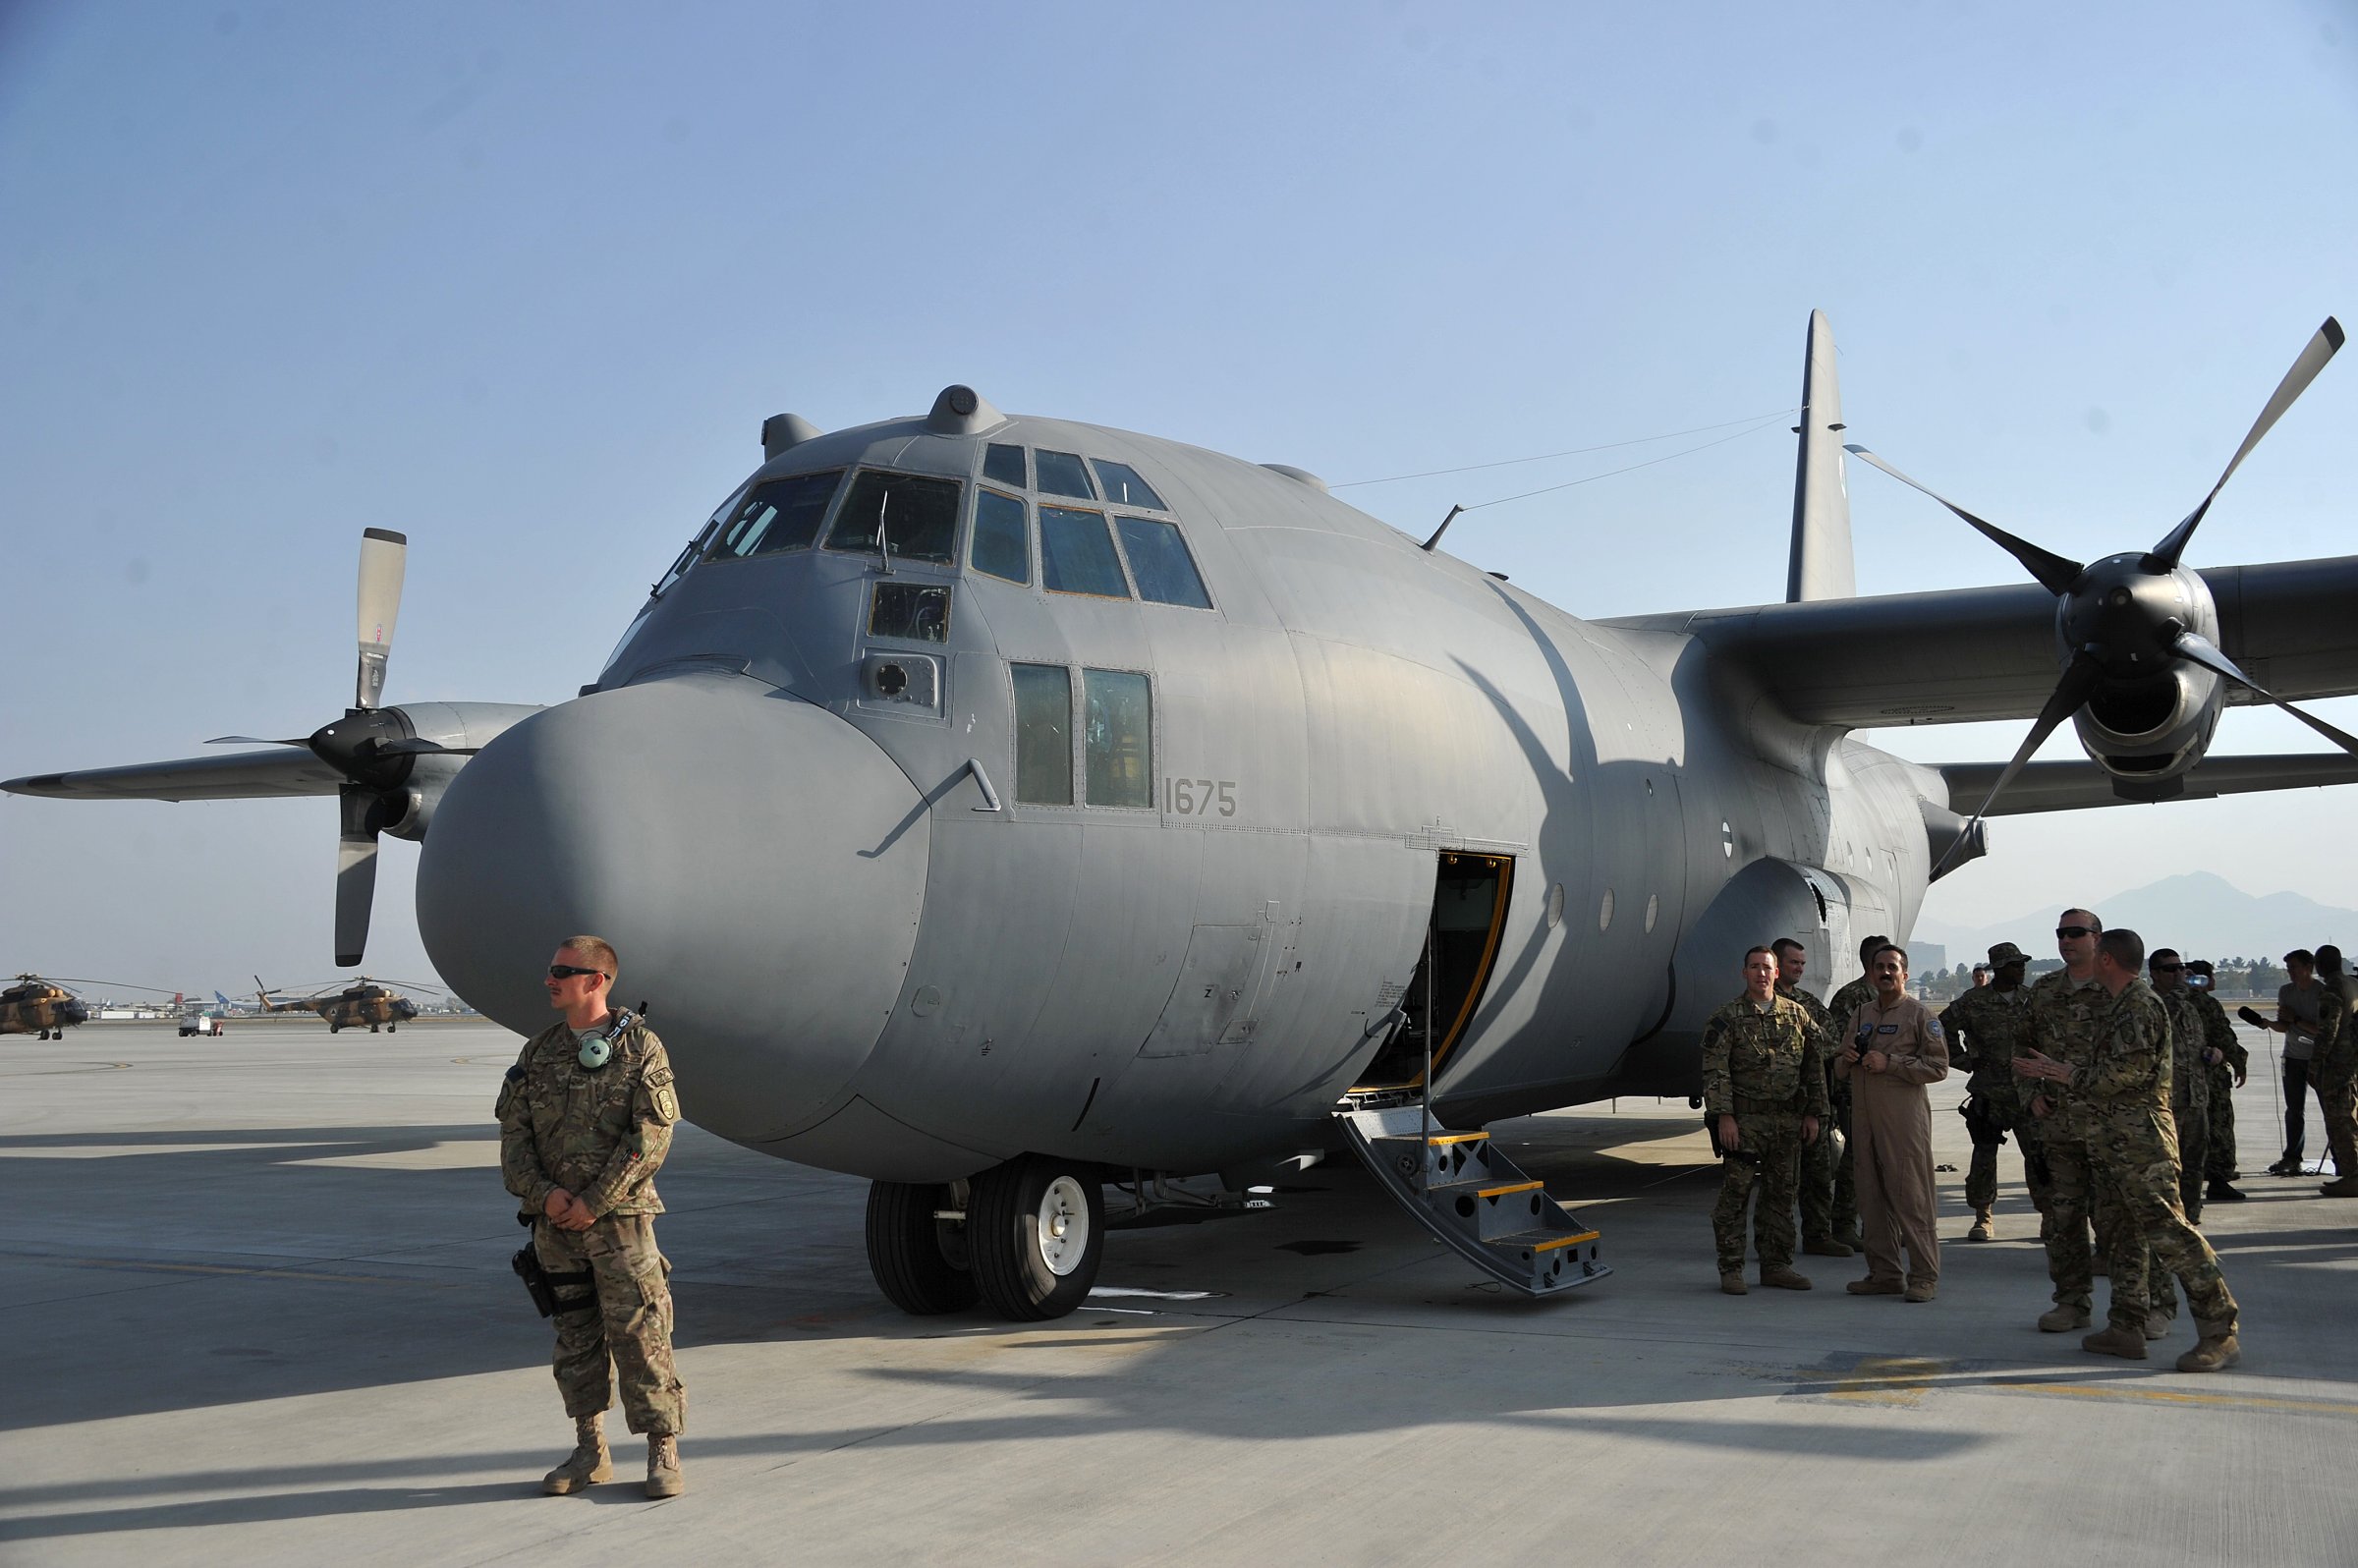 Members of the US Air Force stand alongside a C-130 transport aircraft at Kabul international airport on October 9, 2013.